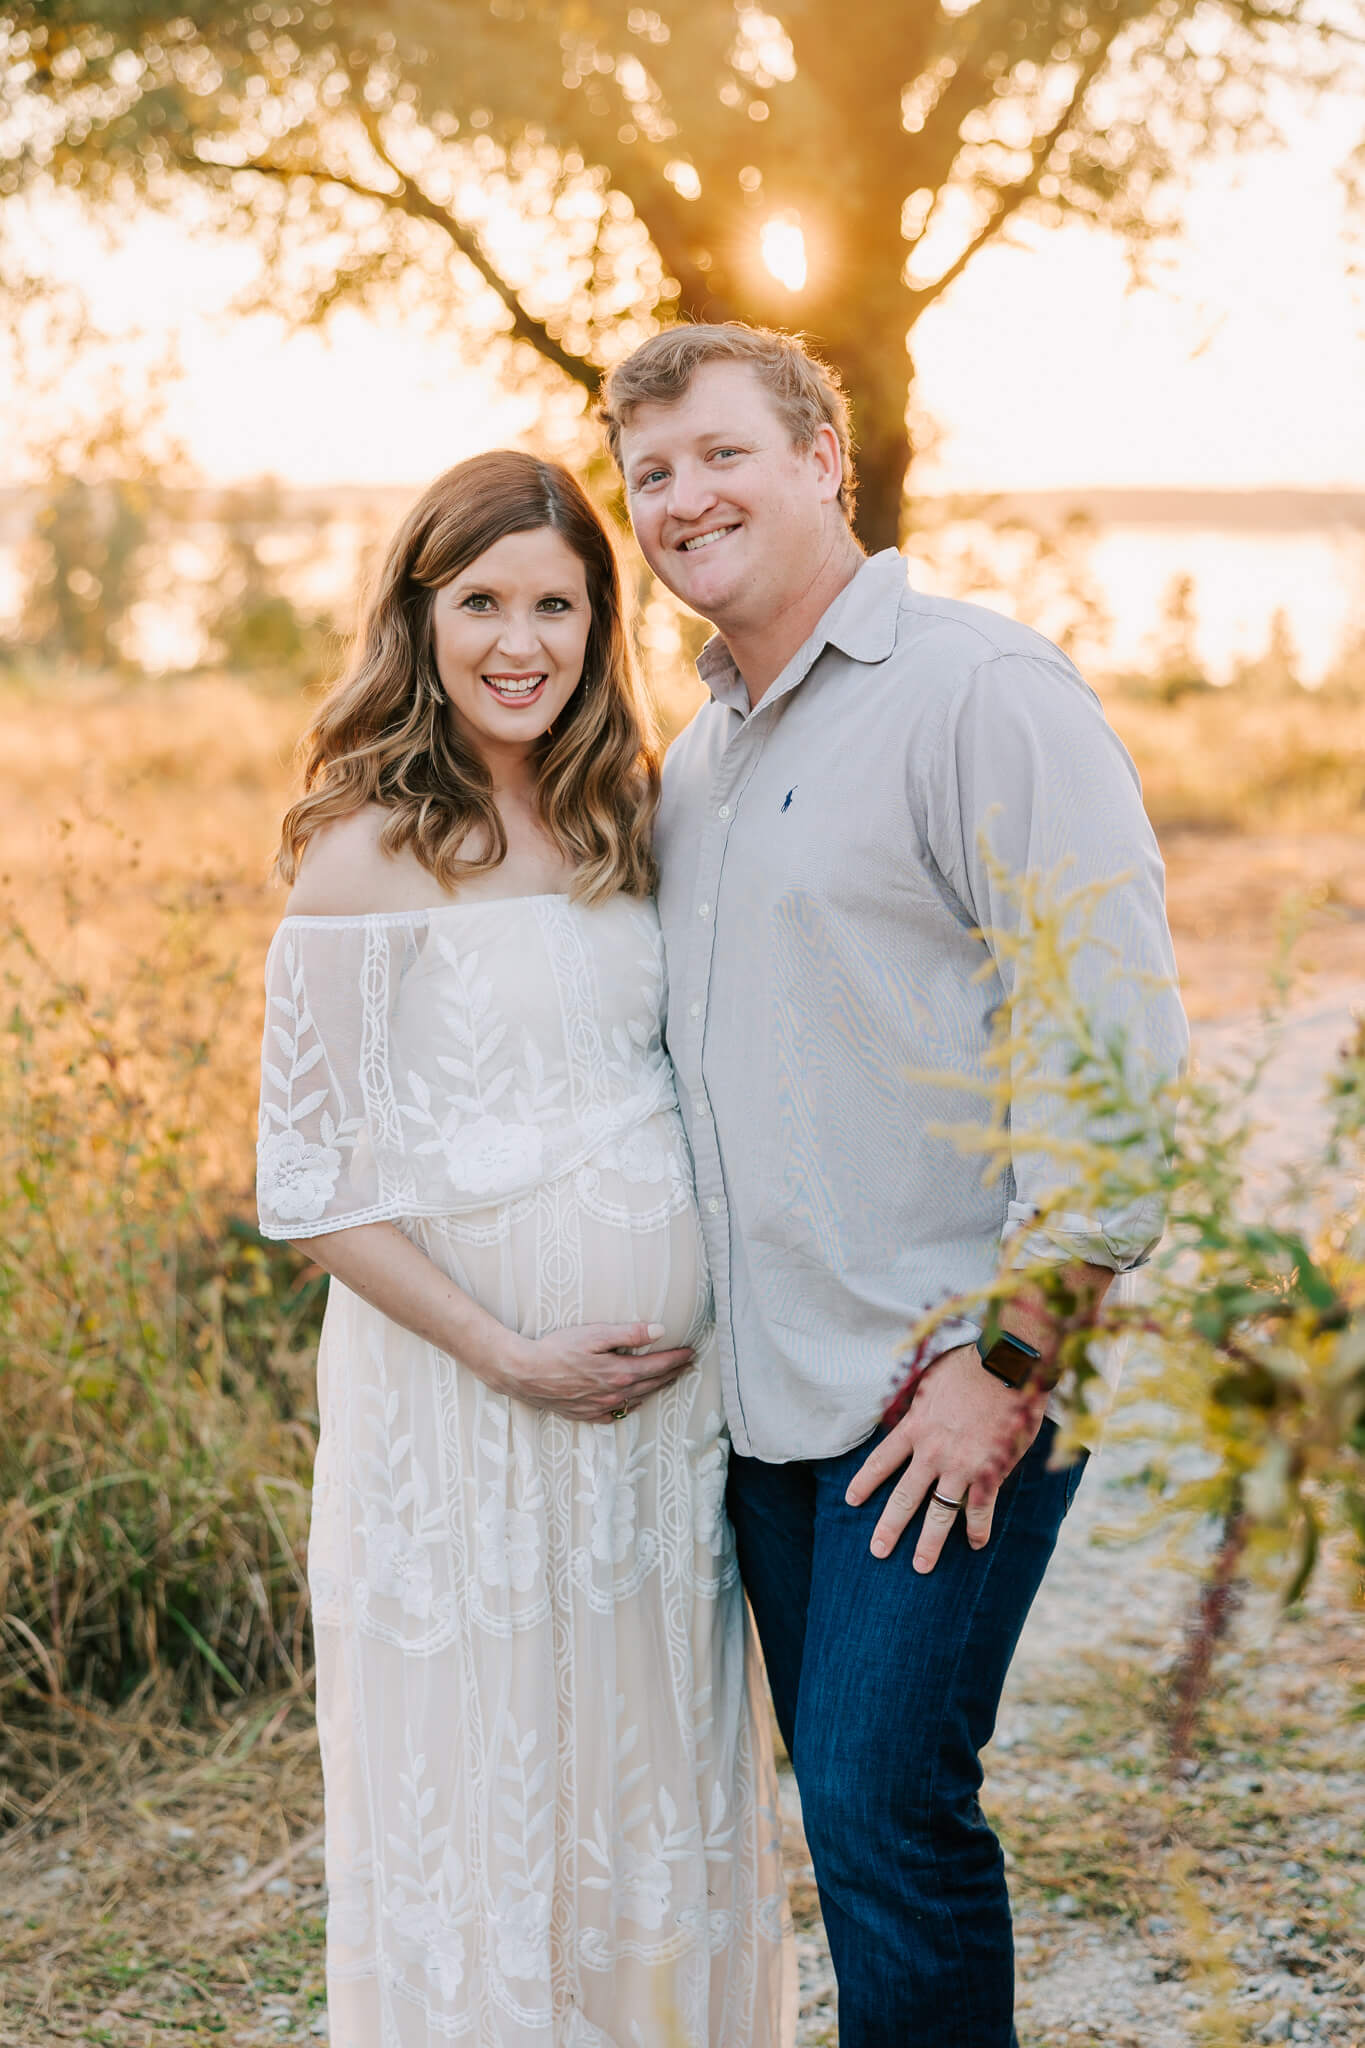 Whitney Collins, David Greene Realty and her husband during their augusta maternity photography session with molly berry photography.